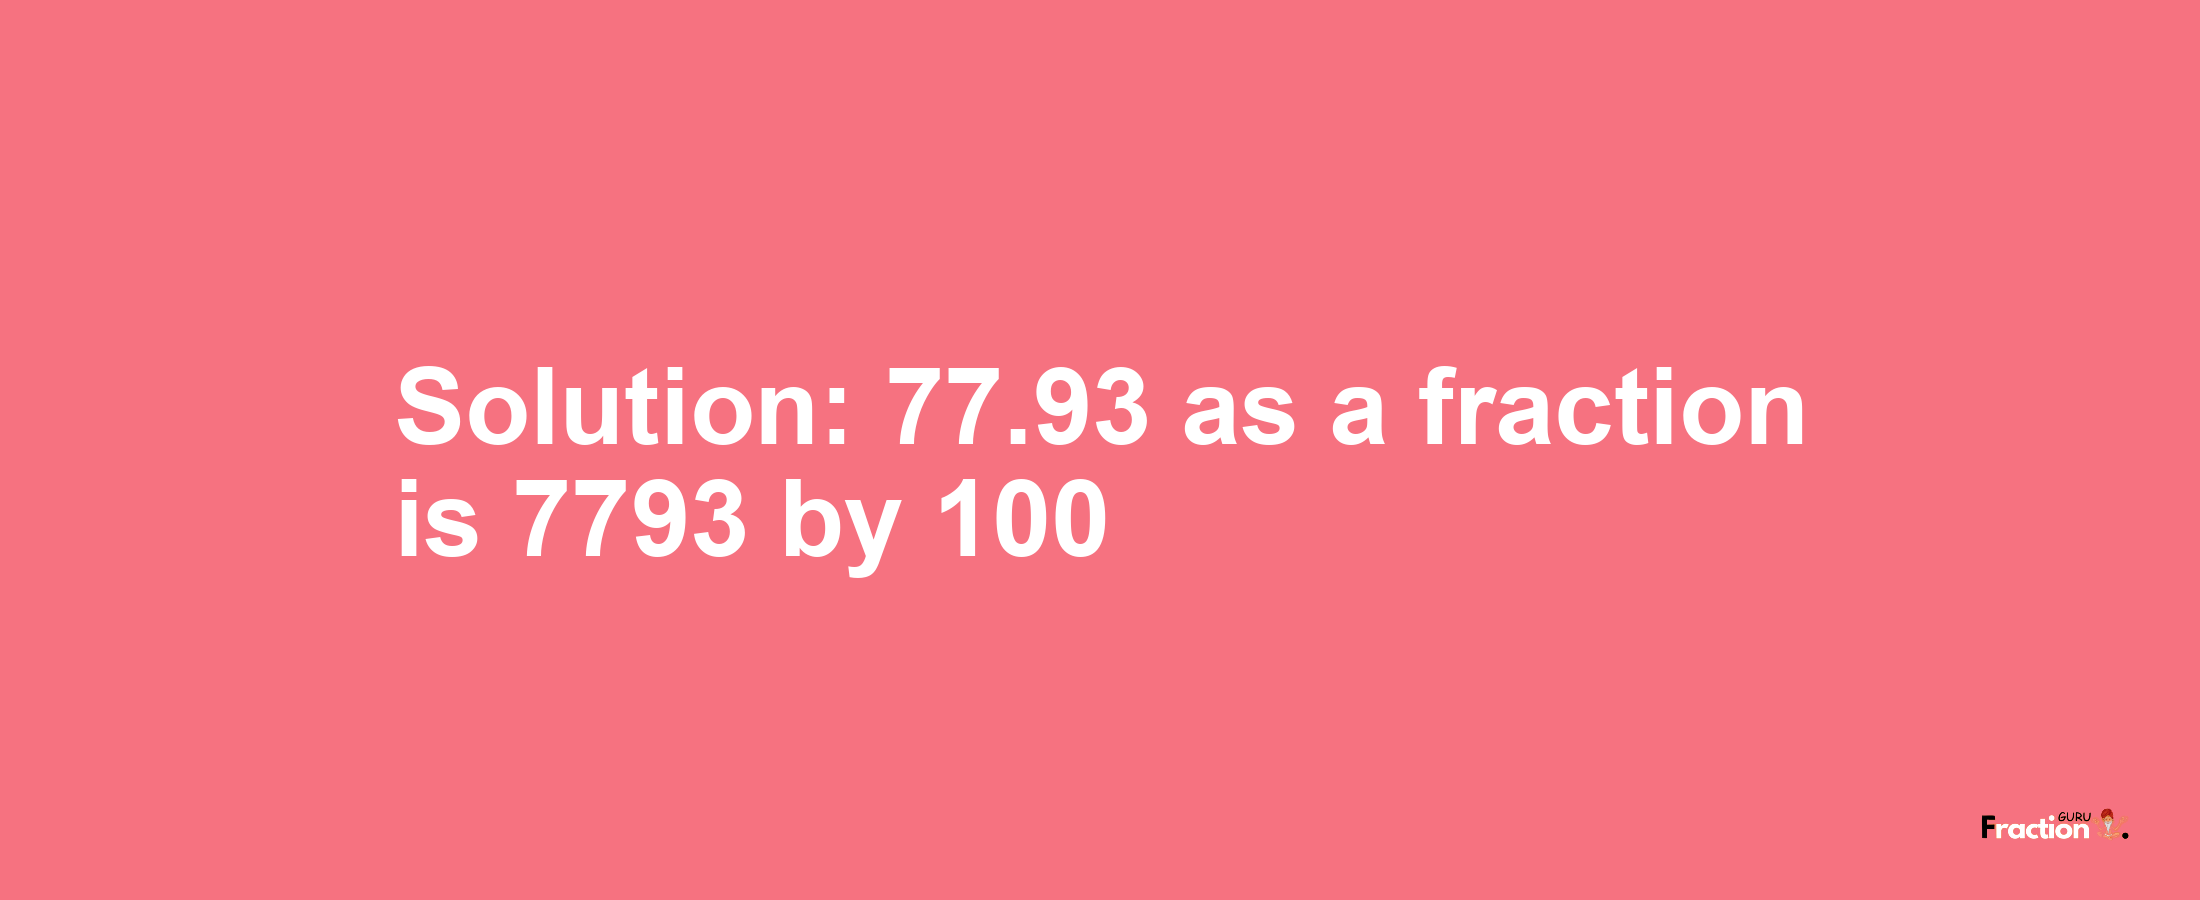 Solution:77.93 as a fraction is 7793/100